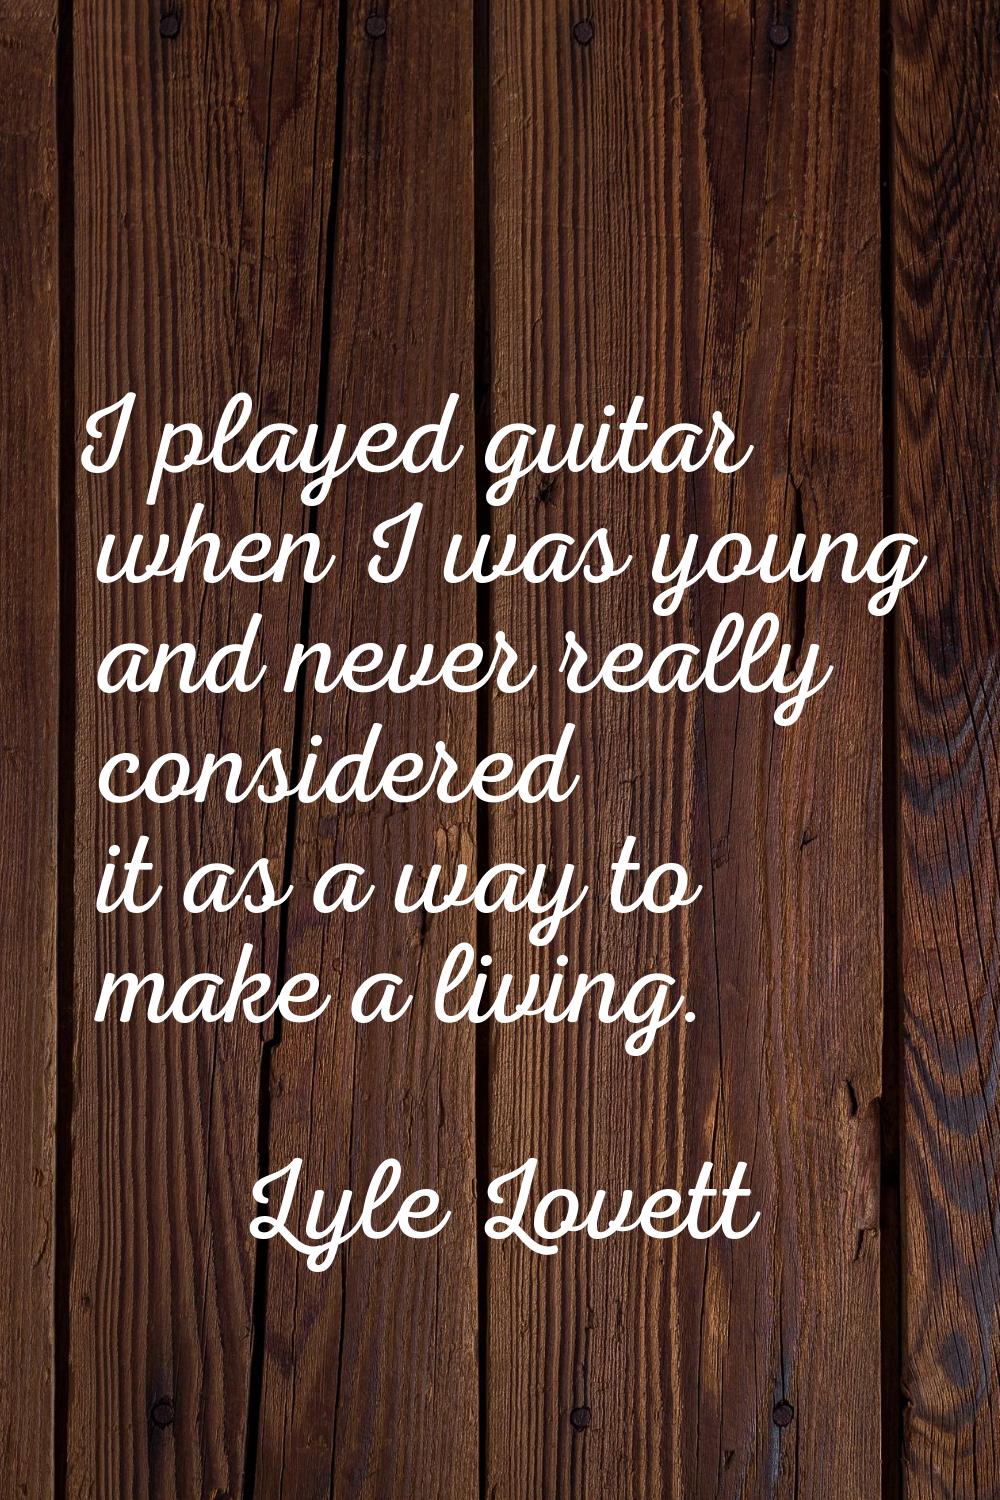 I played guitar when I was young and never really considered it as a way to make a living.